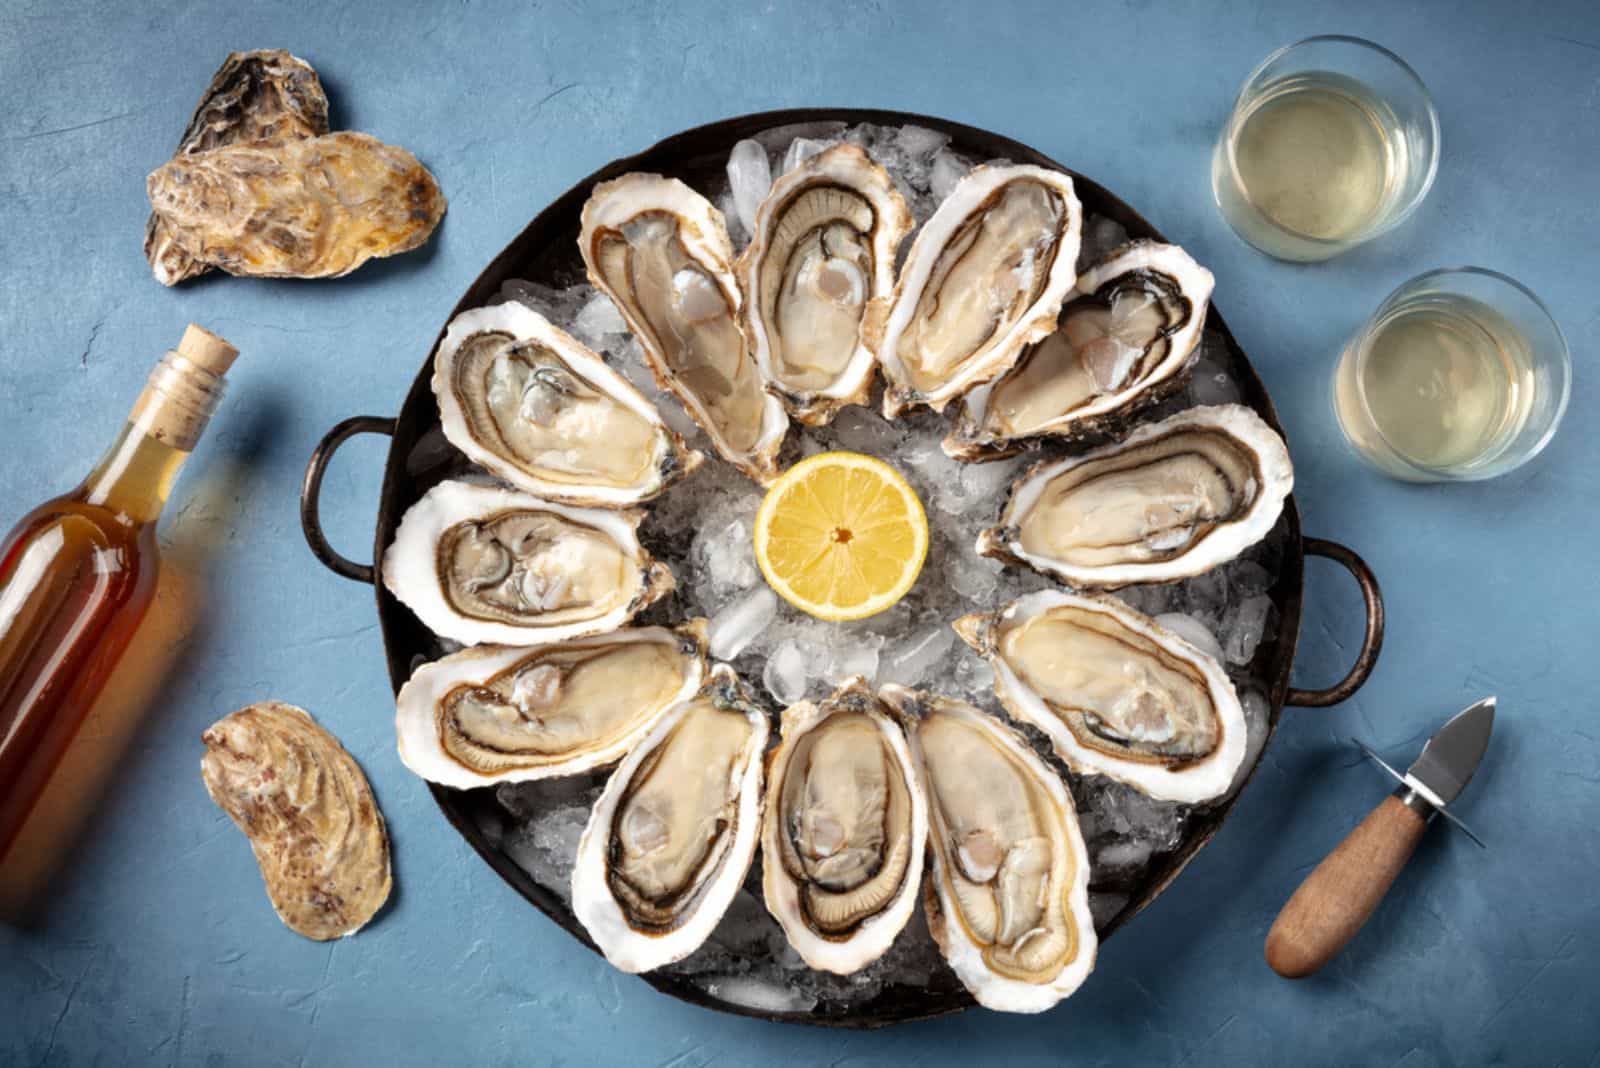 A dozen of raw oysters with a shucking knife